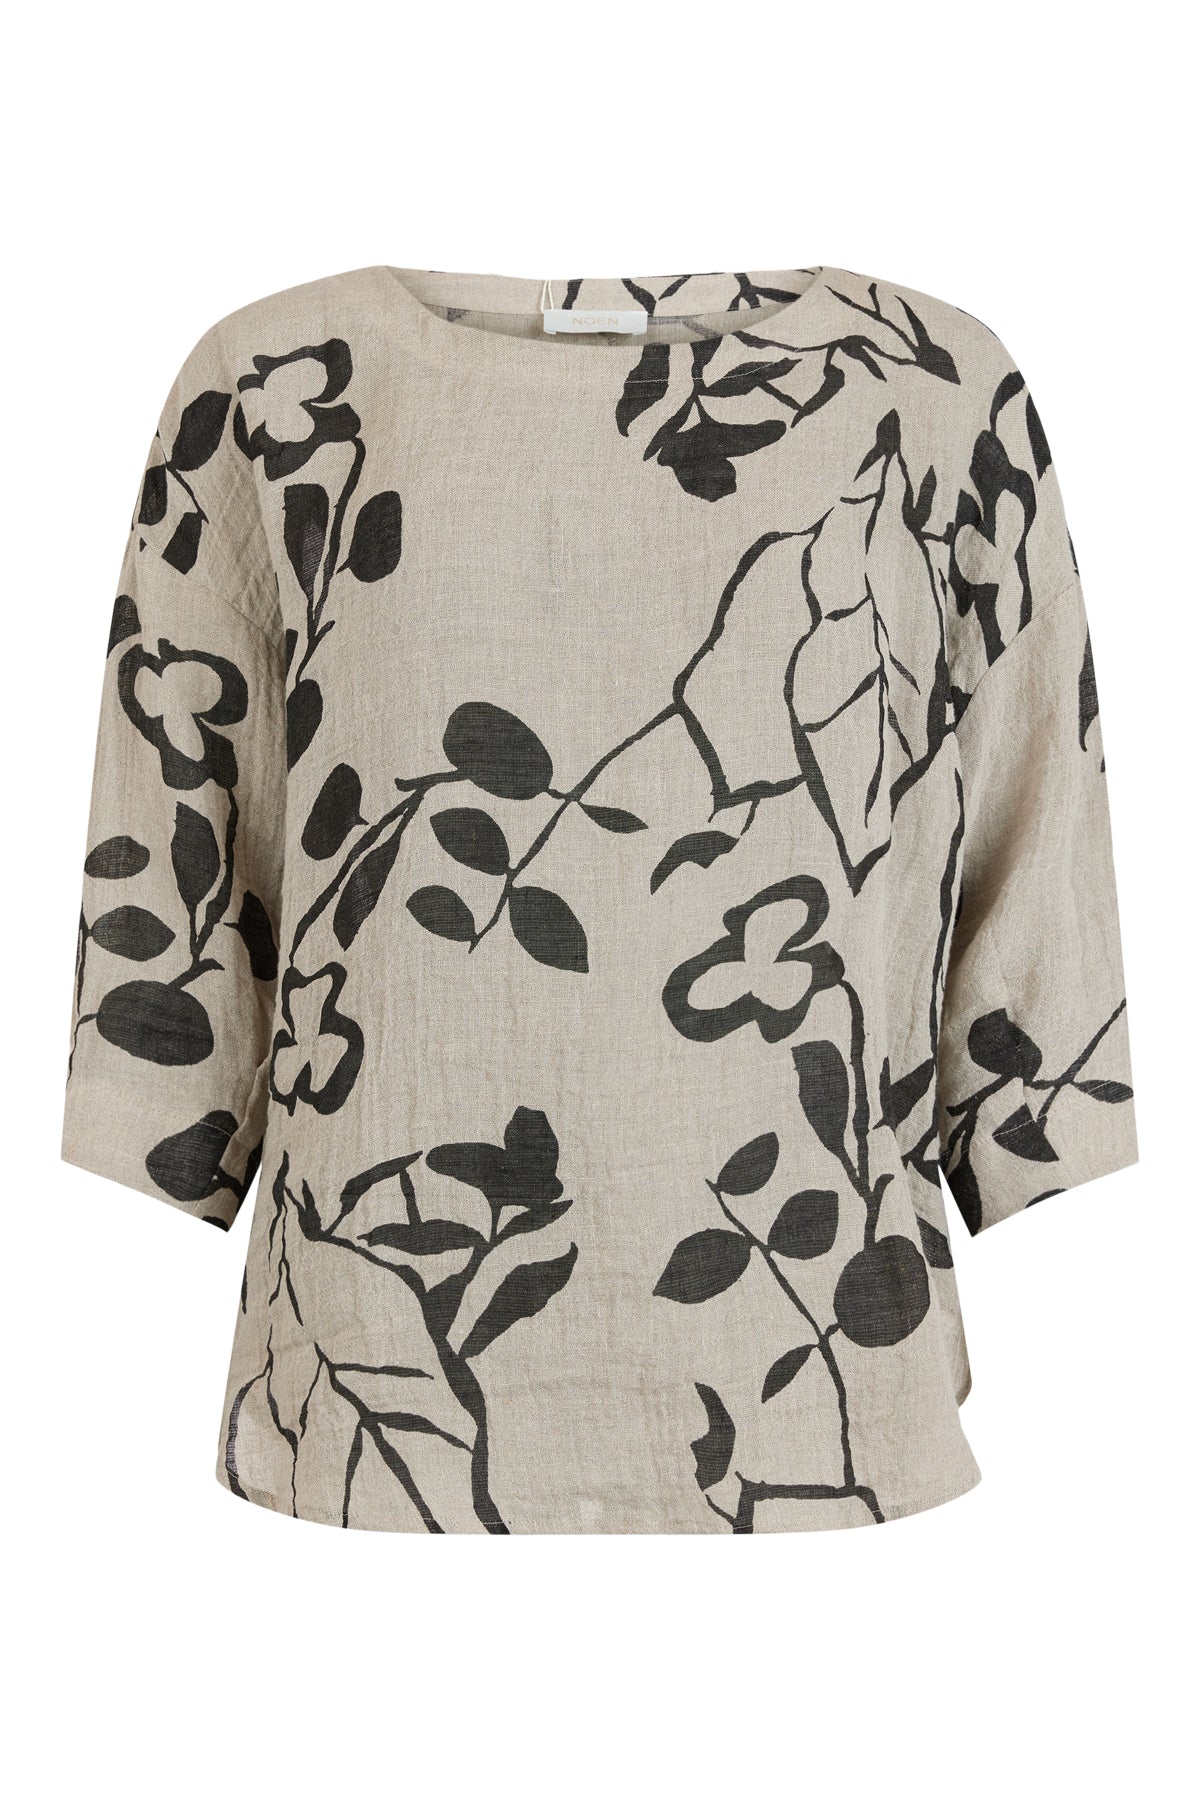 Noen Sand Textured Top With Leaf Print